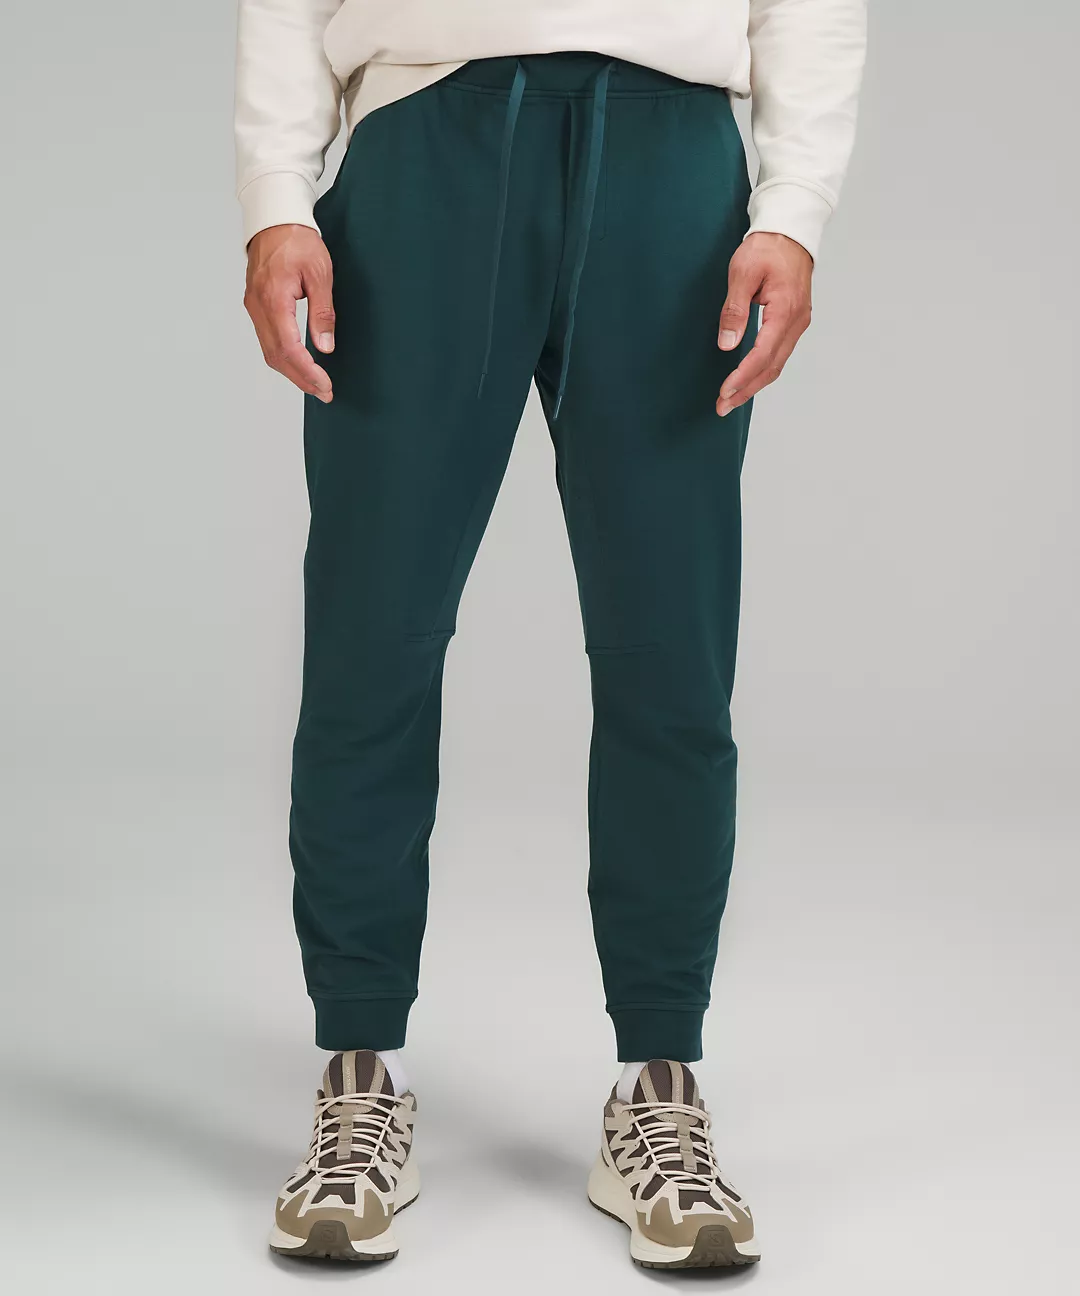 Do you tie the drawstrings on your sweatpants/joggers or leave them untied?  - Quora